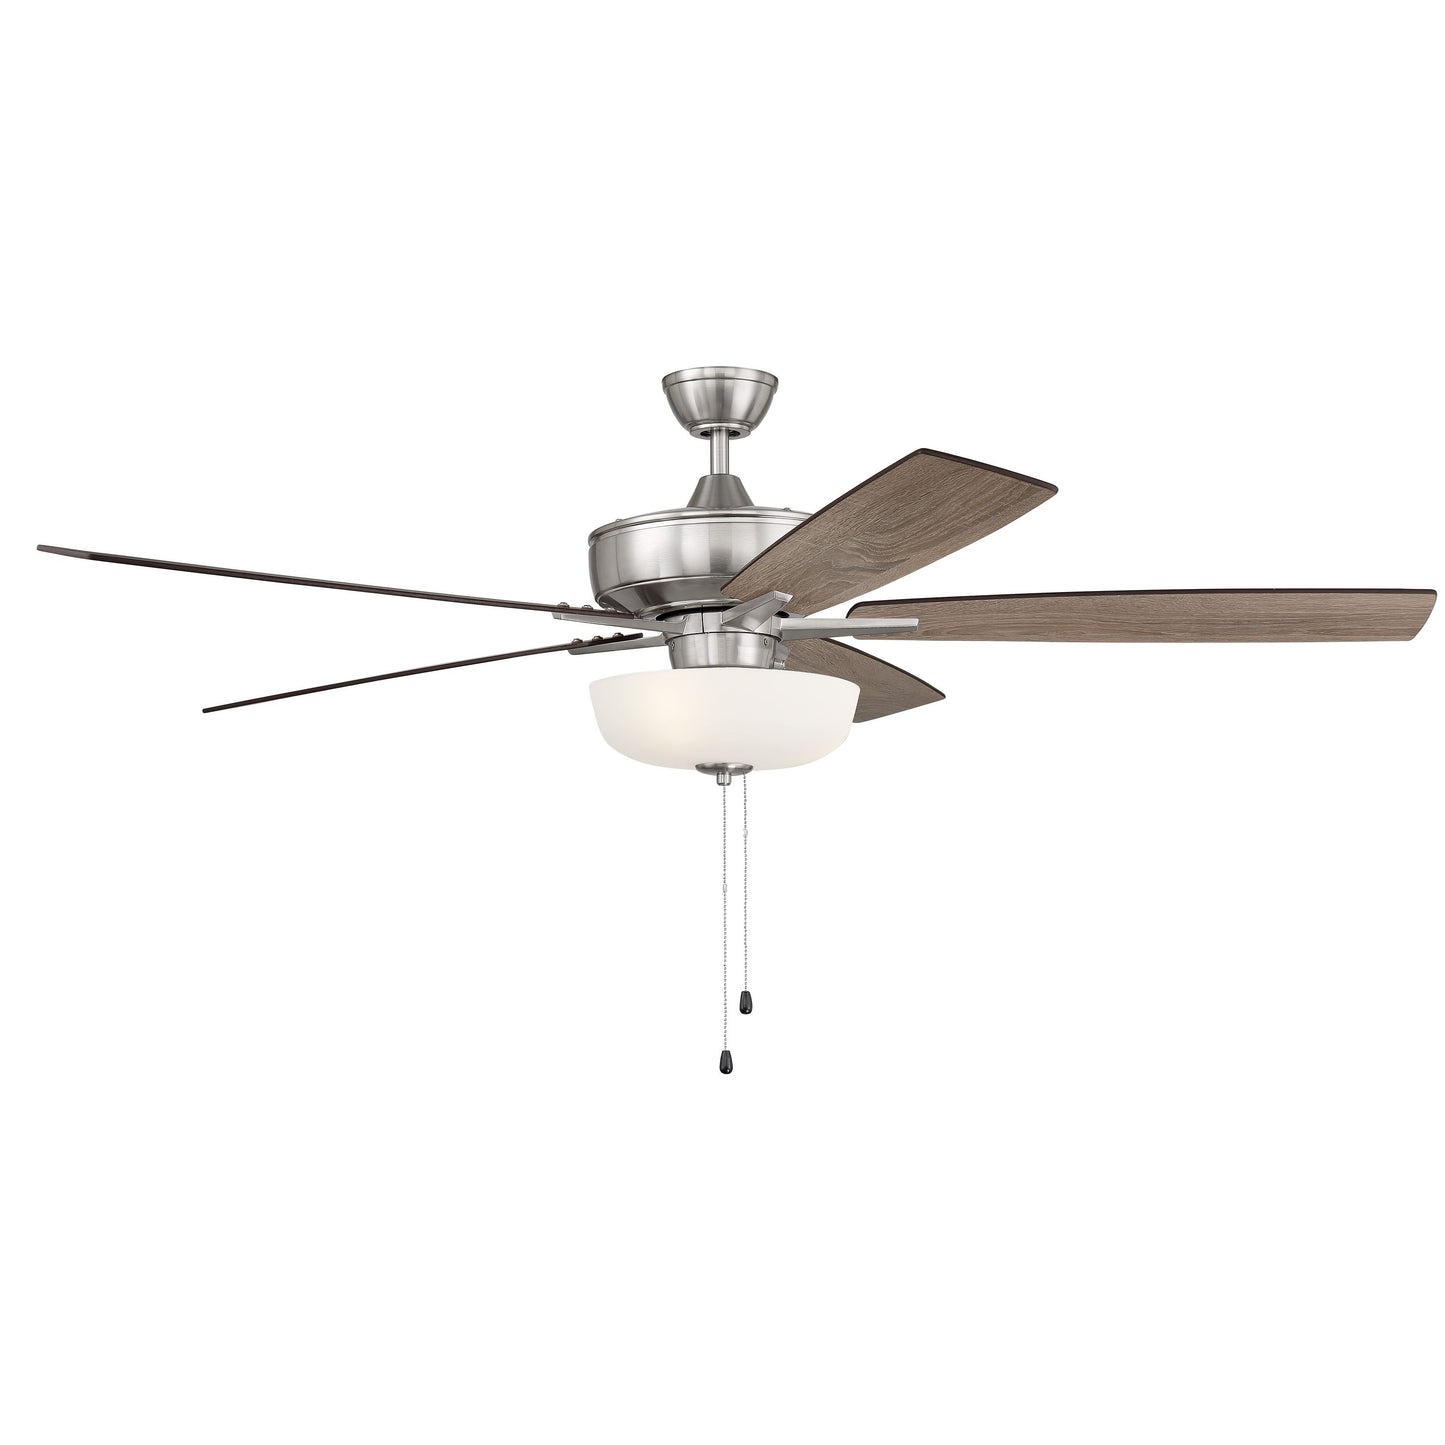 S111BNK5-60DWGWN - Super Pro 111 60" 5 Blade Ceiling Fan with Light Kit - Pull Chain - Brushed Polis